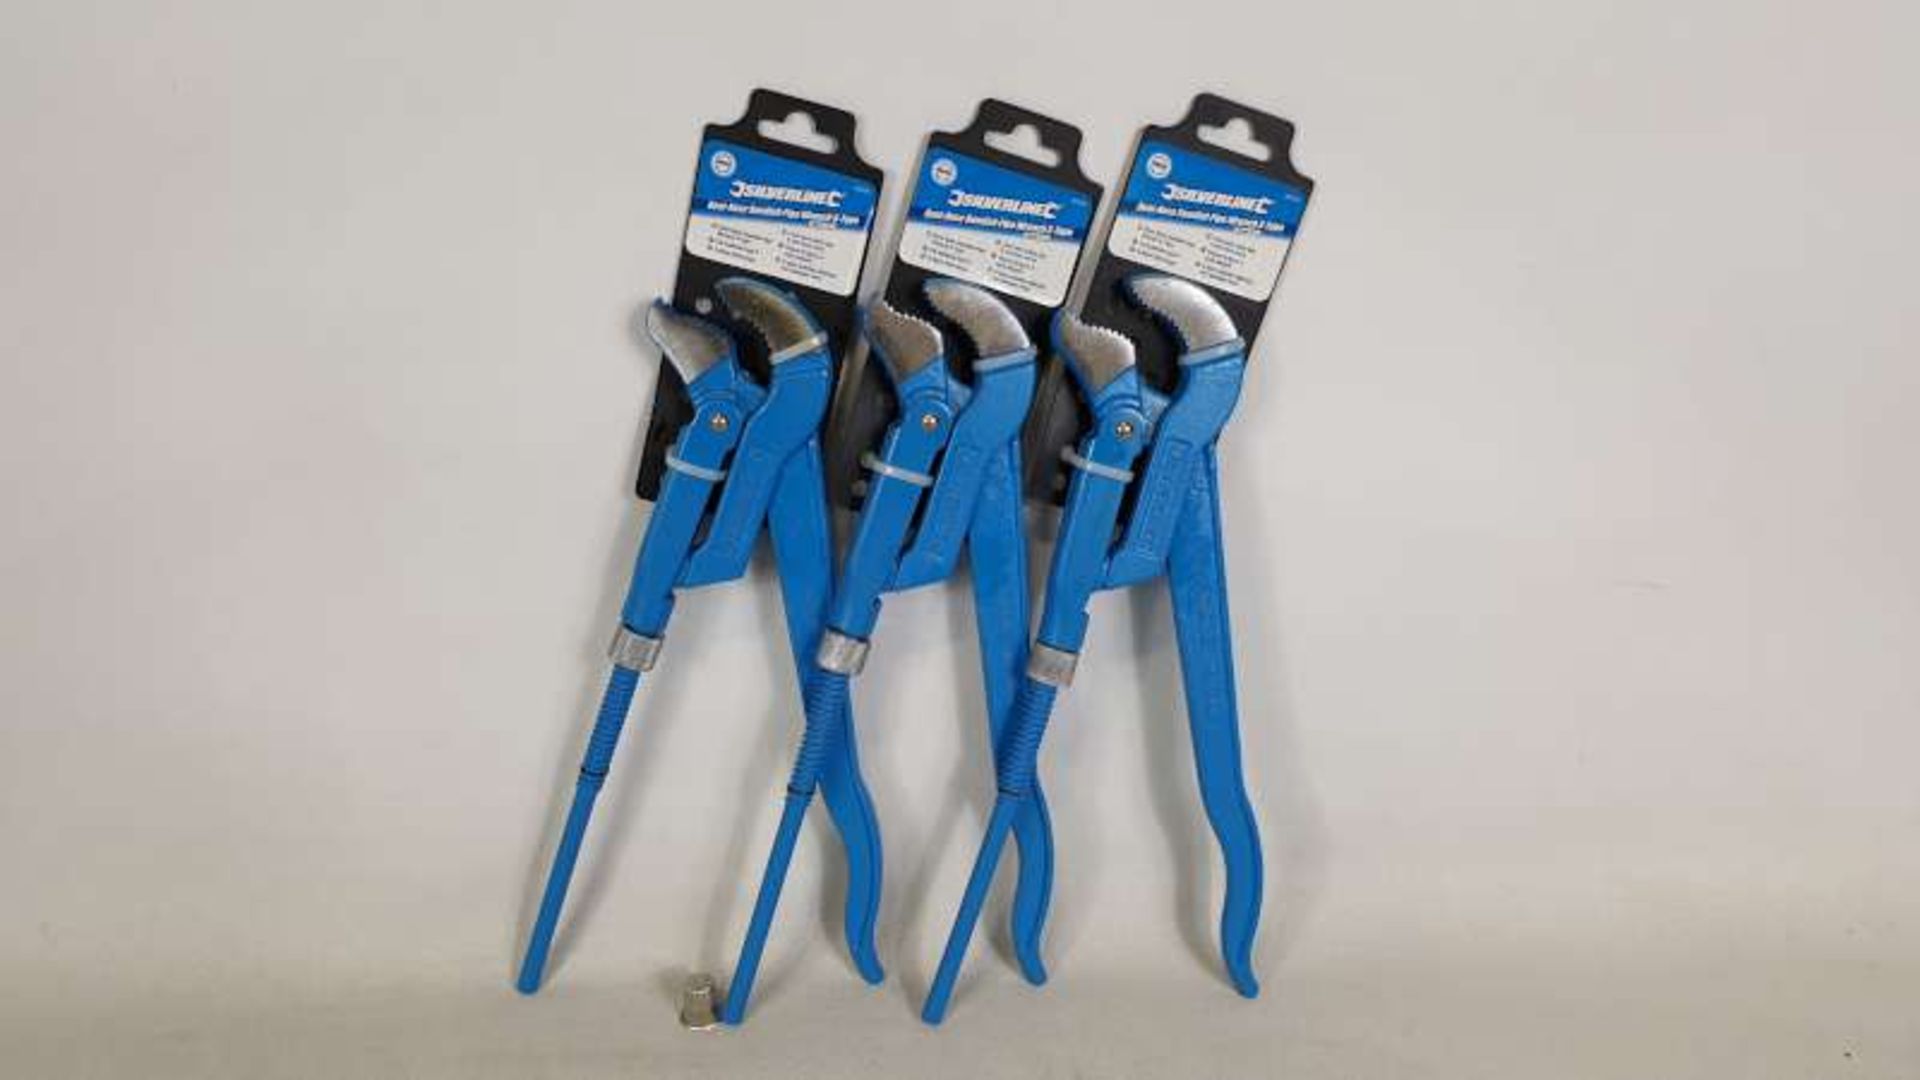 24 X BRAND NEW SILVERLINE BENT NOSE SWEDISH PIPE WRENCH S-TYPE 25MM IN 1 BOX